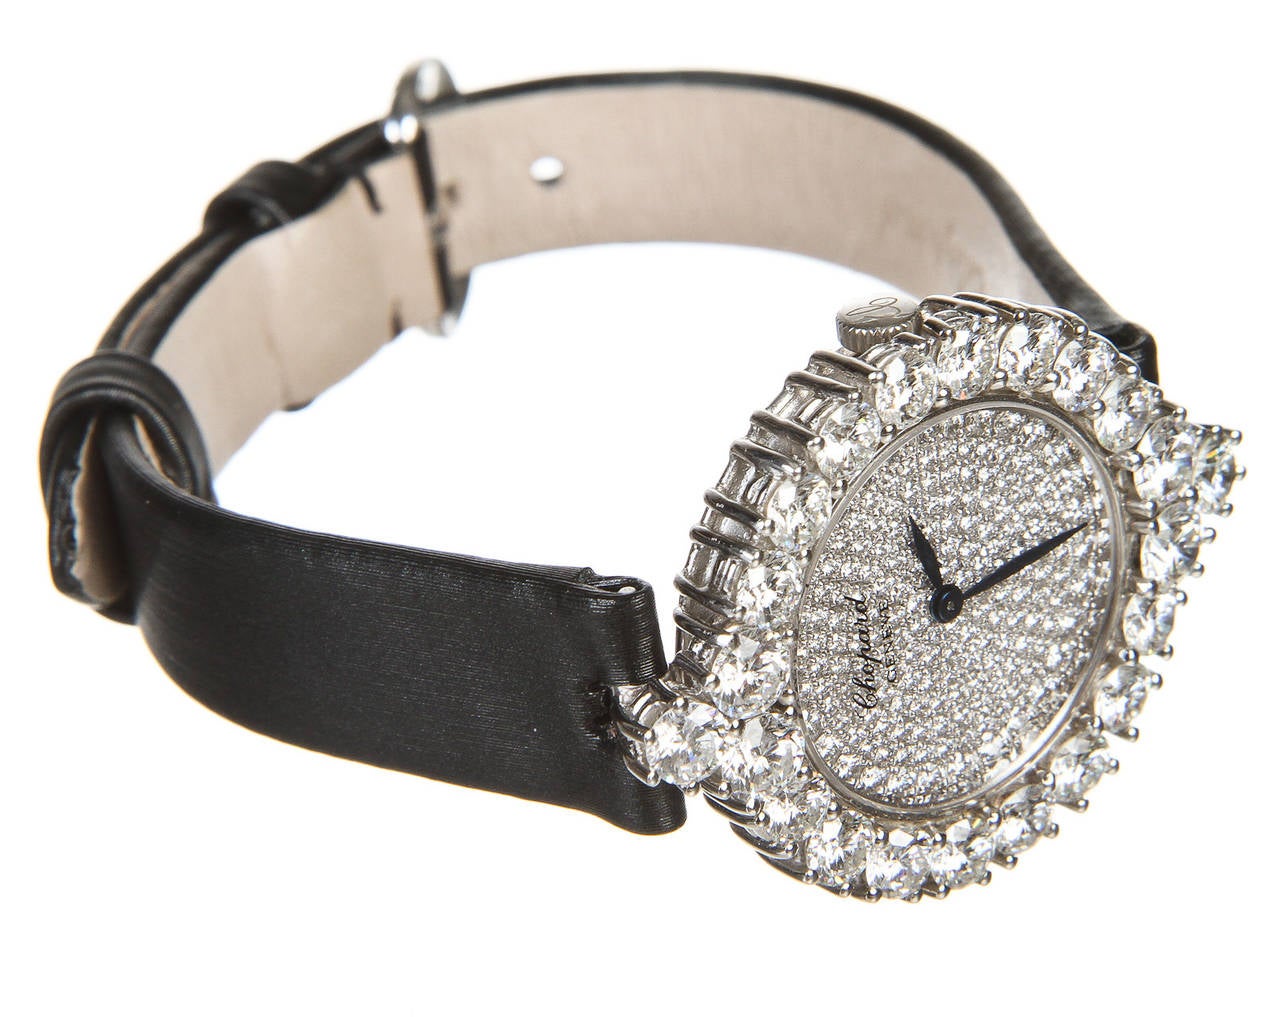 Can you imagine unwrapping this little beauty? This distinctive Chopard diamond watch adds a touch of refined class to any ensemble. This watch has been crafted from 18k white gold and features a very unique face. The pin closure clasp means that